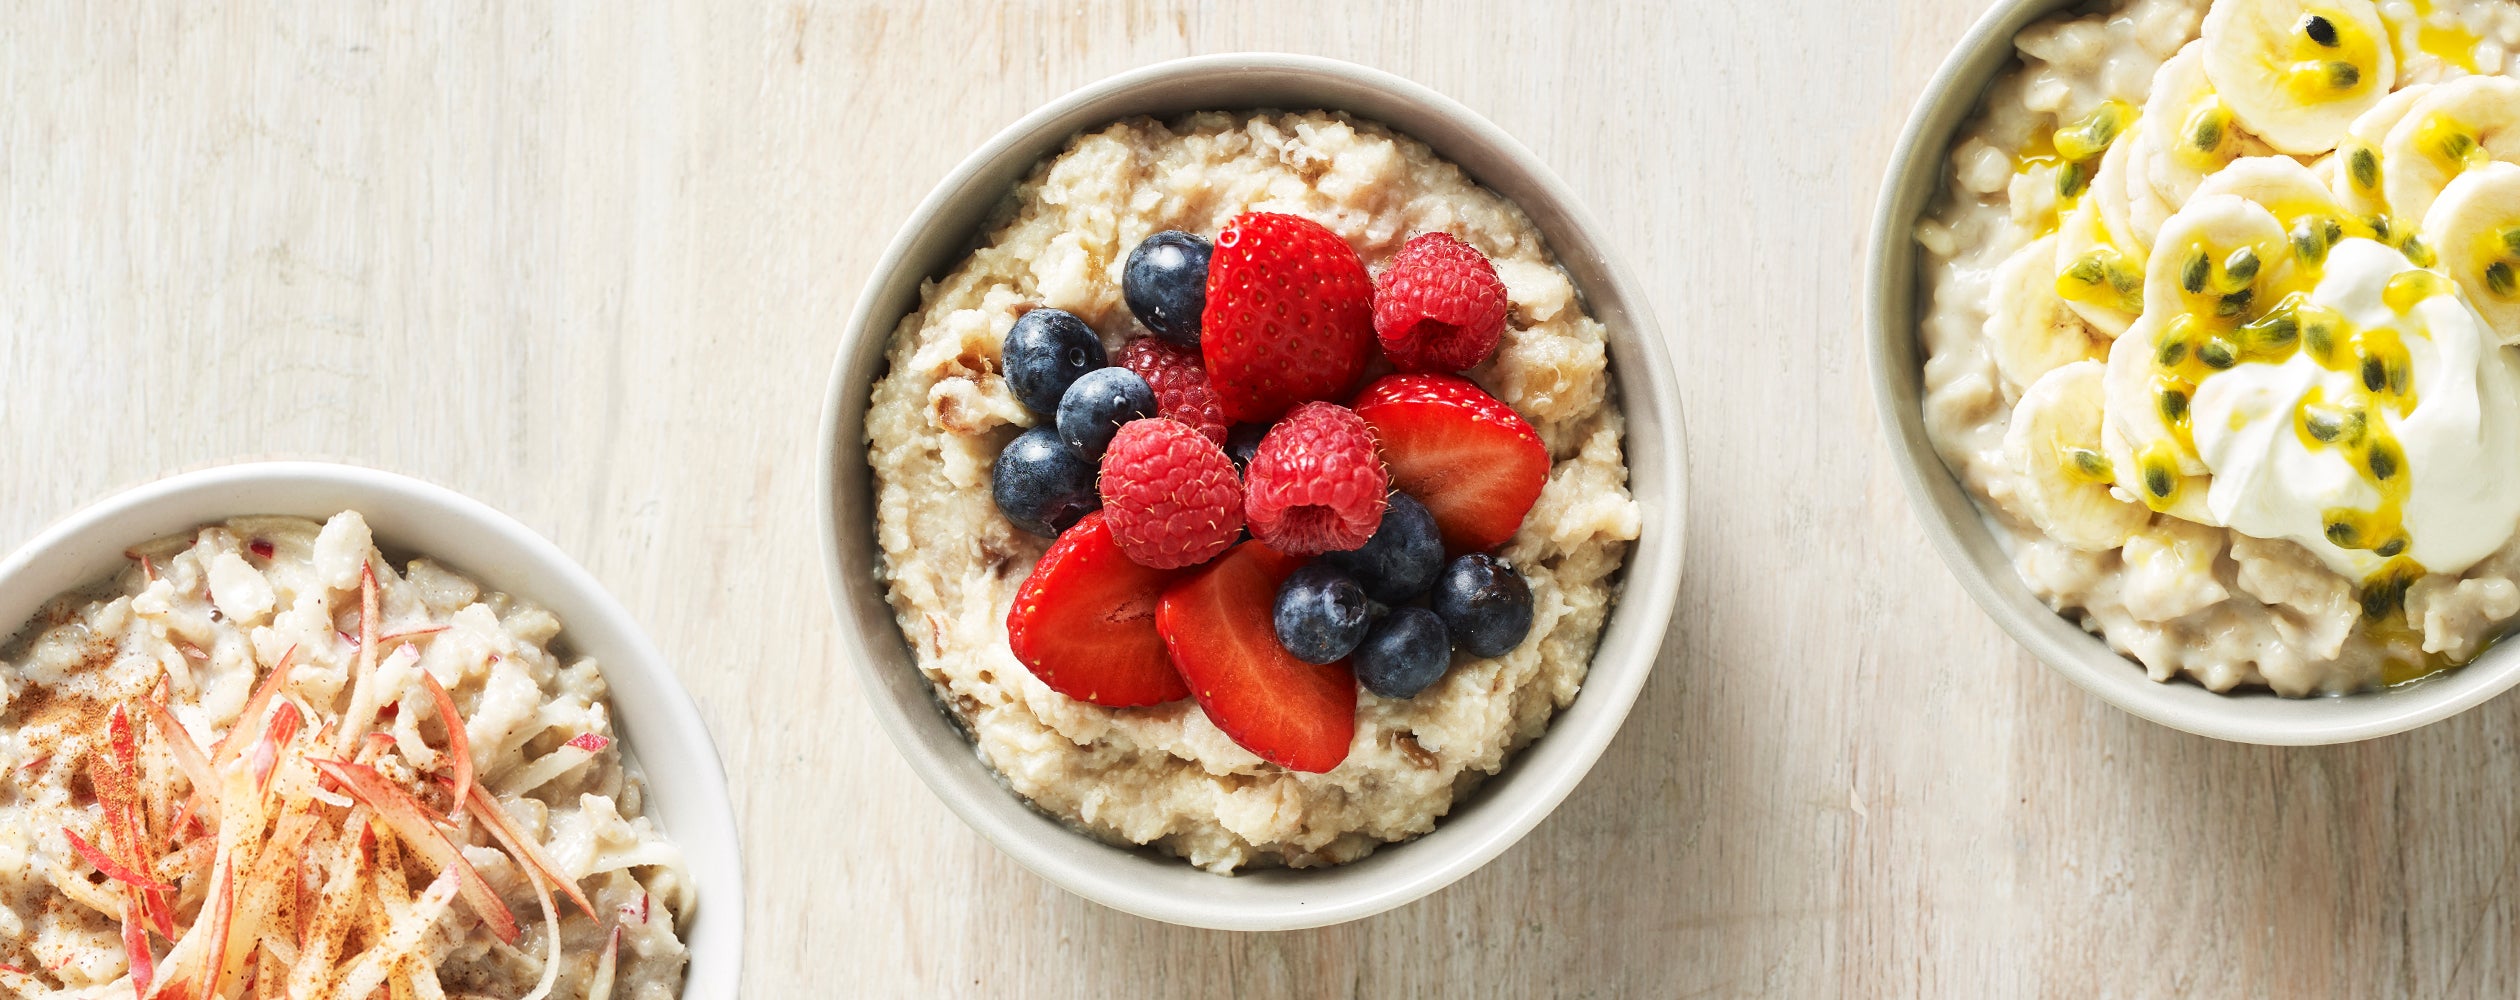 Are Oats Good for You? | WW Australia